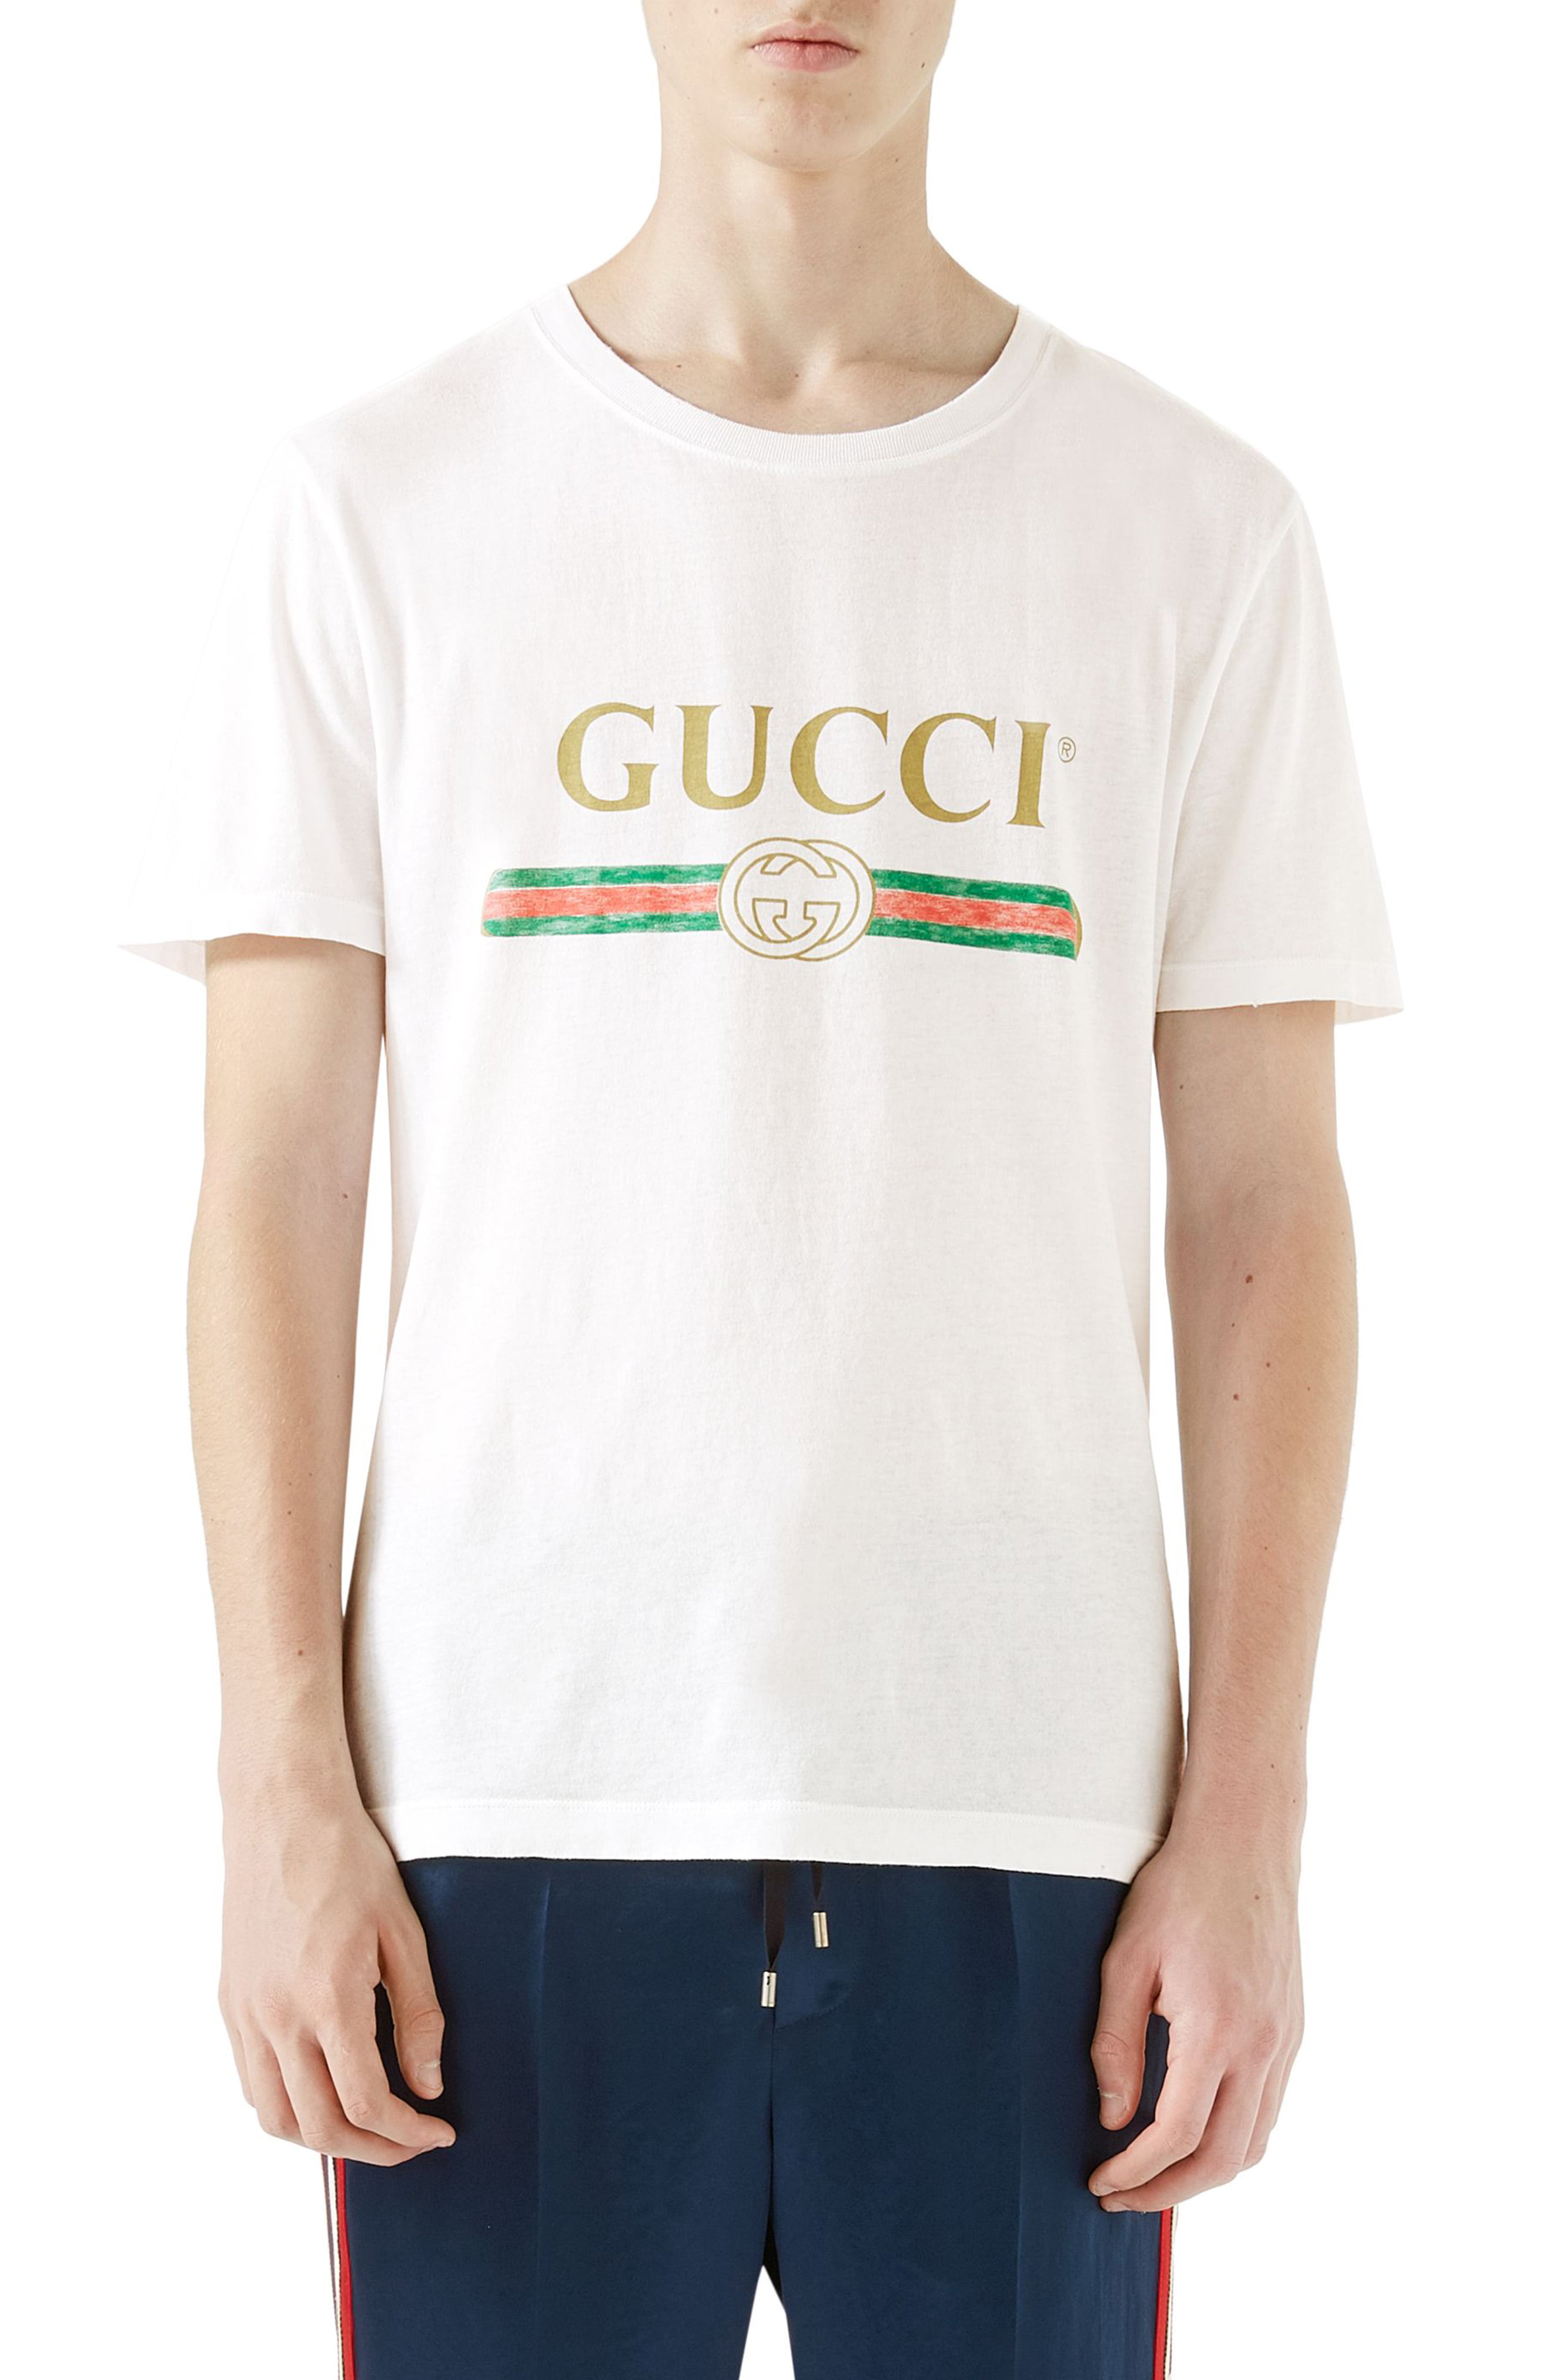 gucci clothes for men, OFF 76%,welcome 